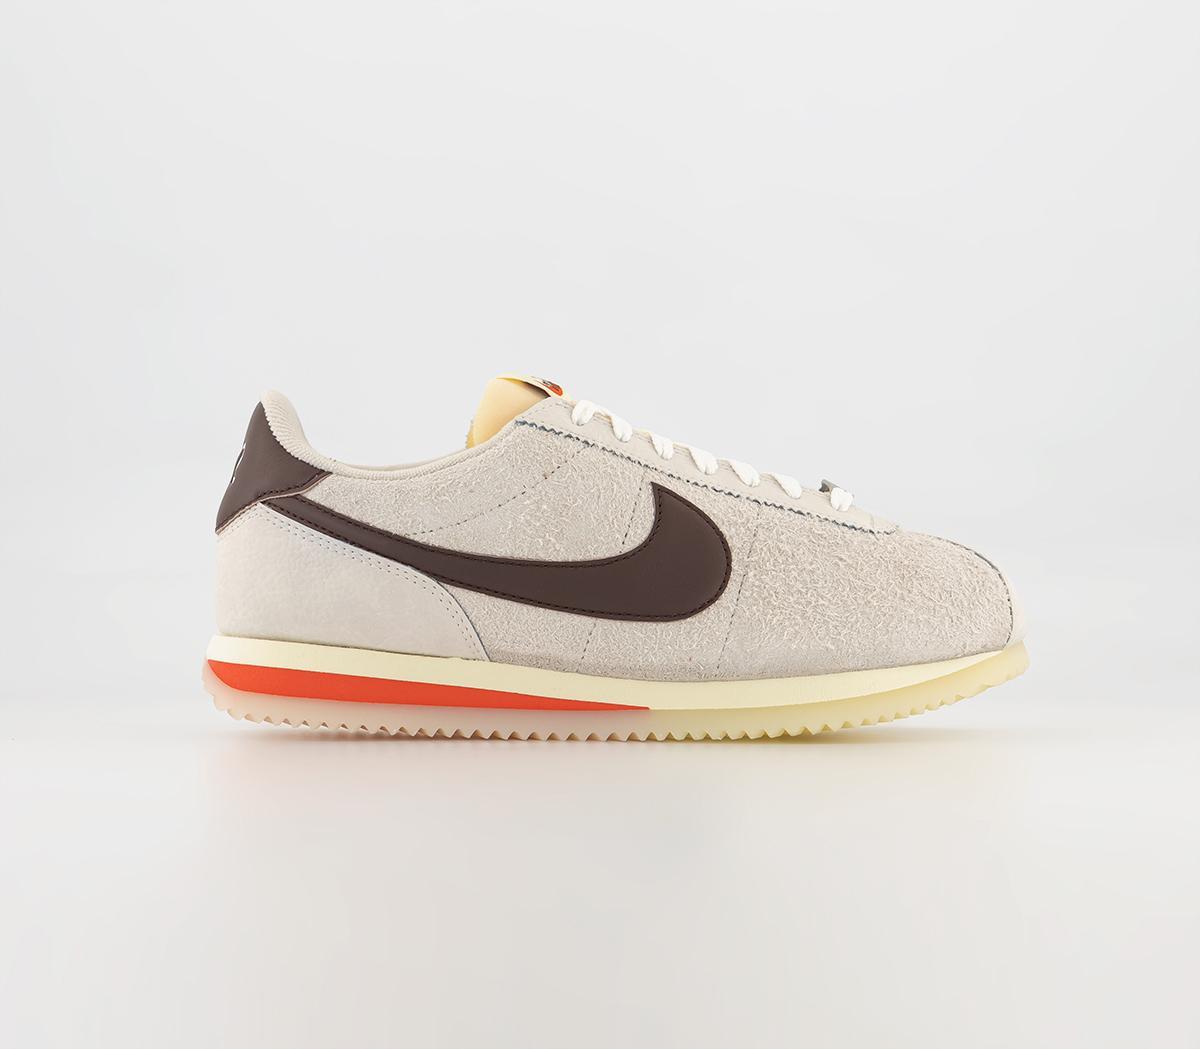 Nike Cortez Trainers Sail Earth Light Orewood Silver Picante R - Men's Trainers